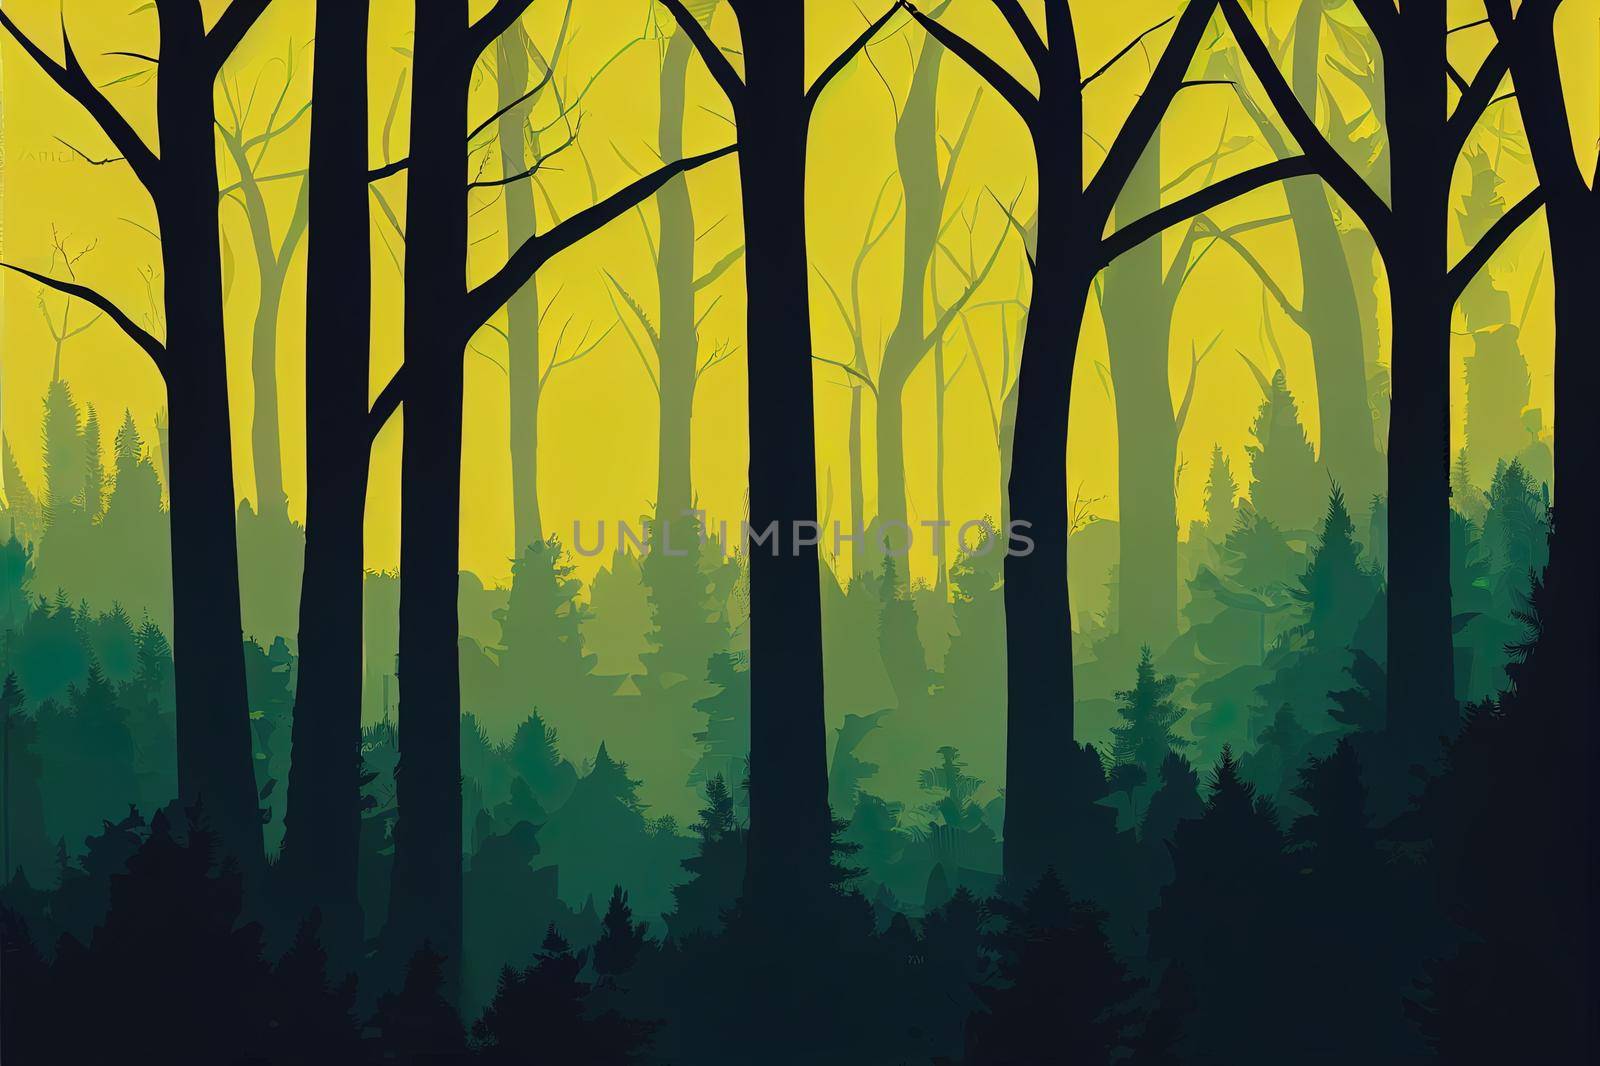 Abstract forest silhouette nature, landscape illustration